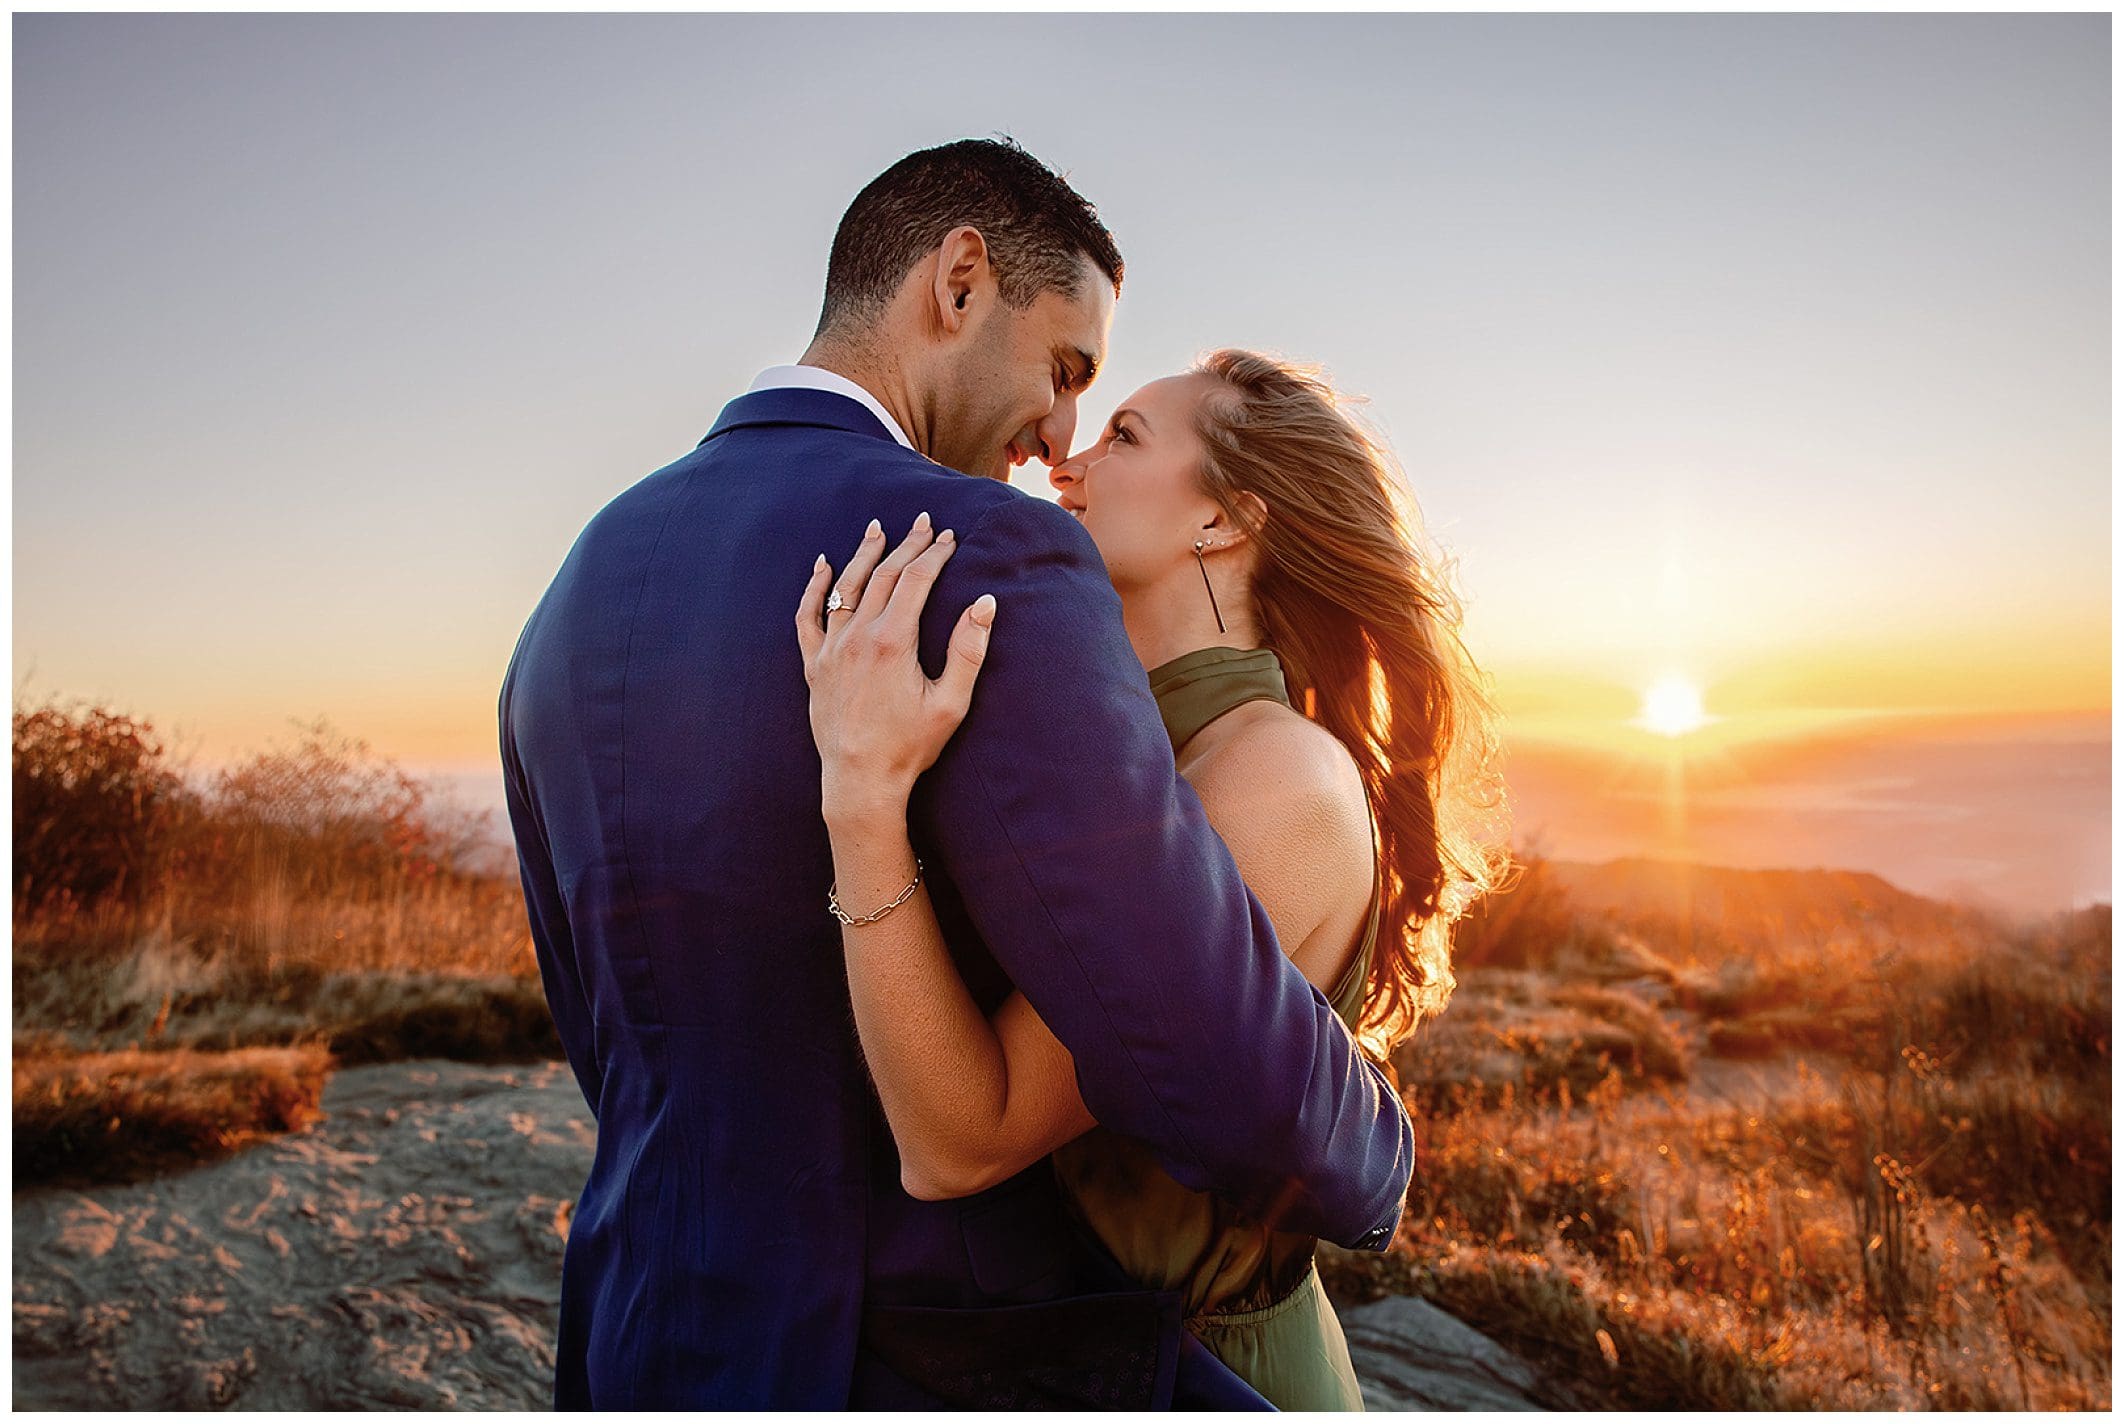 Couple embracing at sunrise with scenic black balsam view.